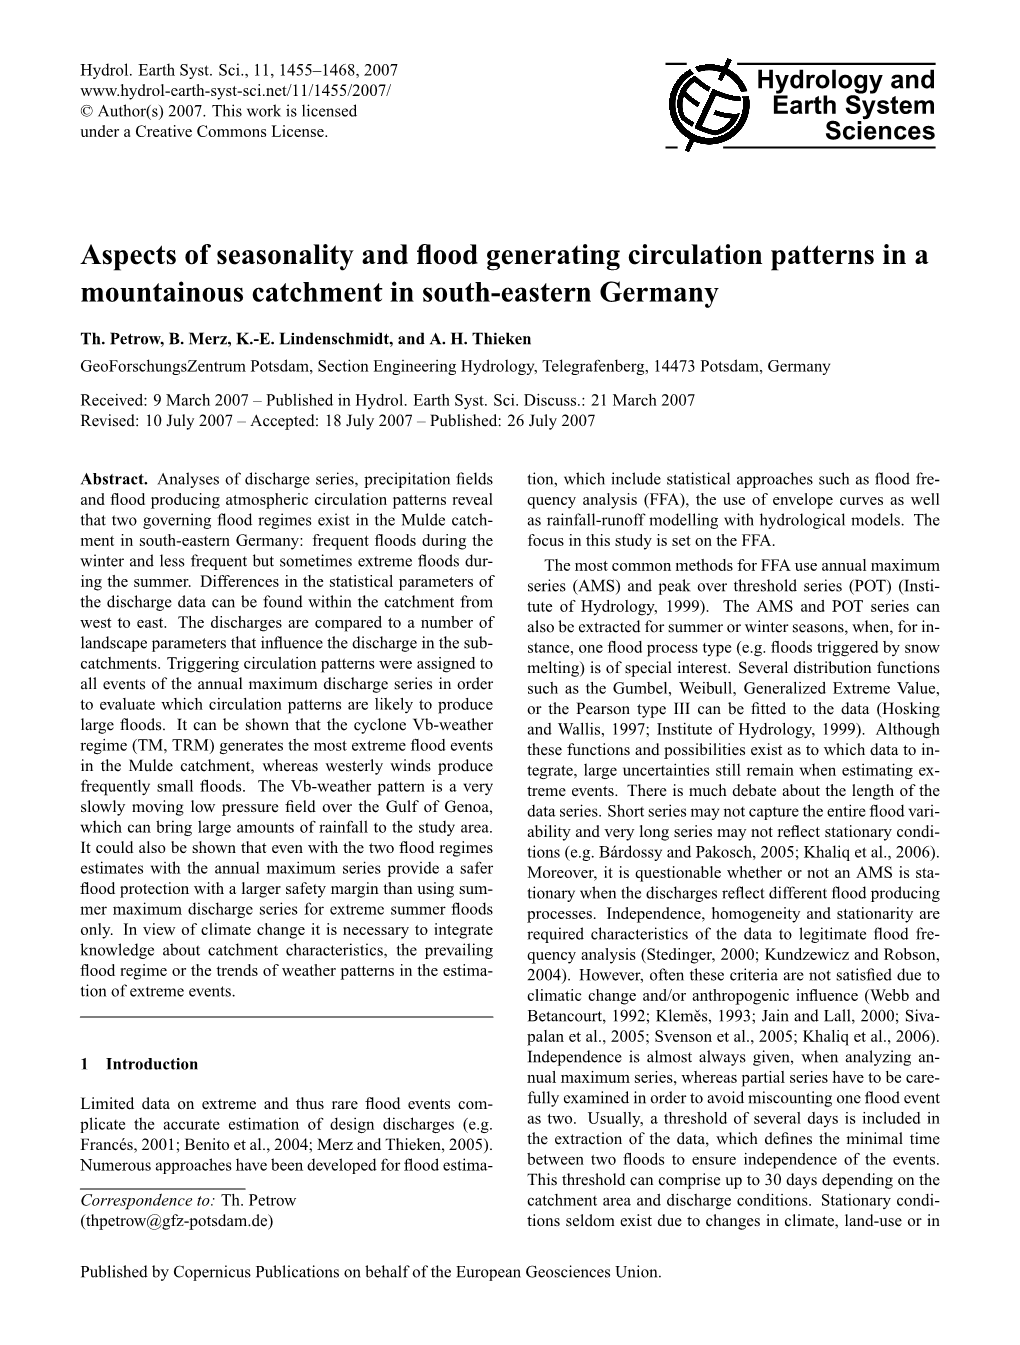 Aspects of Seasonality and Flood Generating Circulation Patterns in A